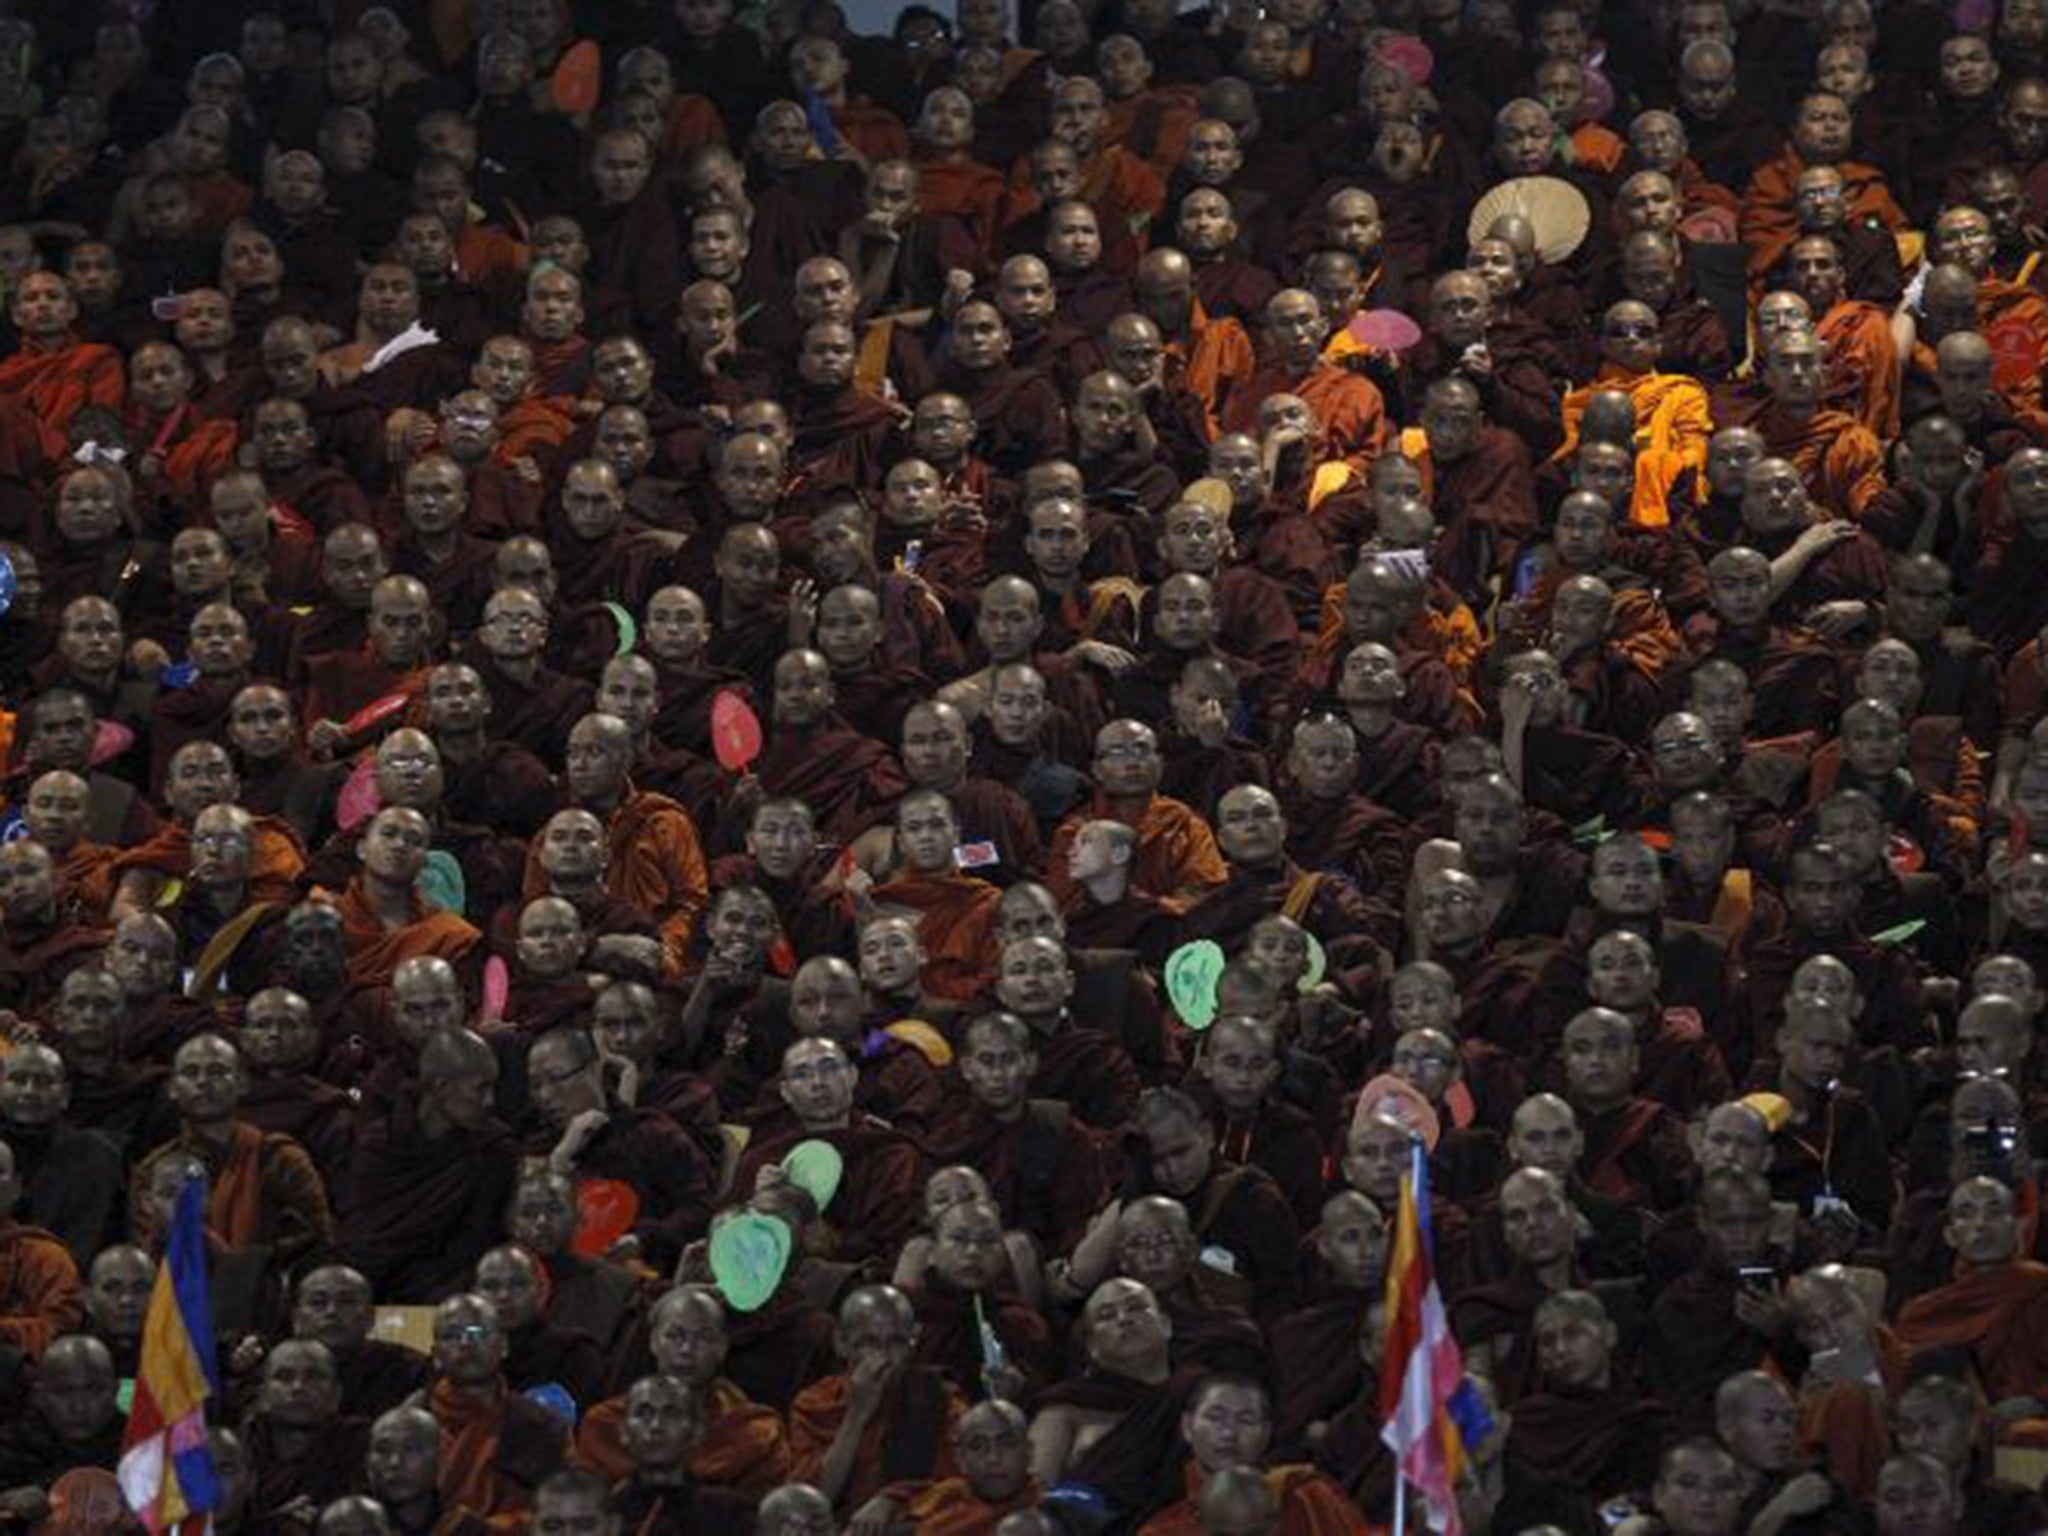 Buddhist monks attend a rally in Rangoon on 4 October 2015